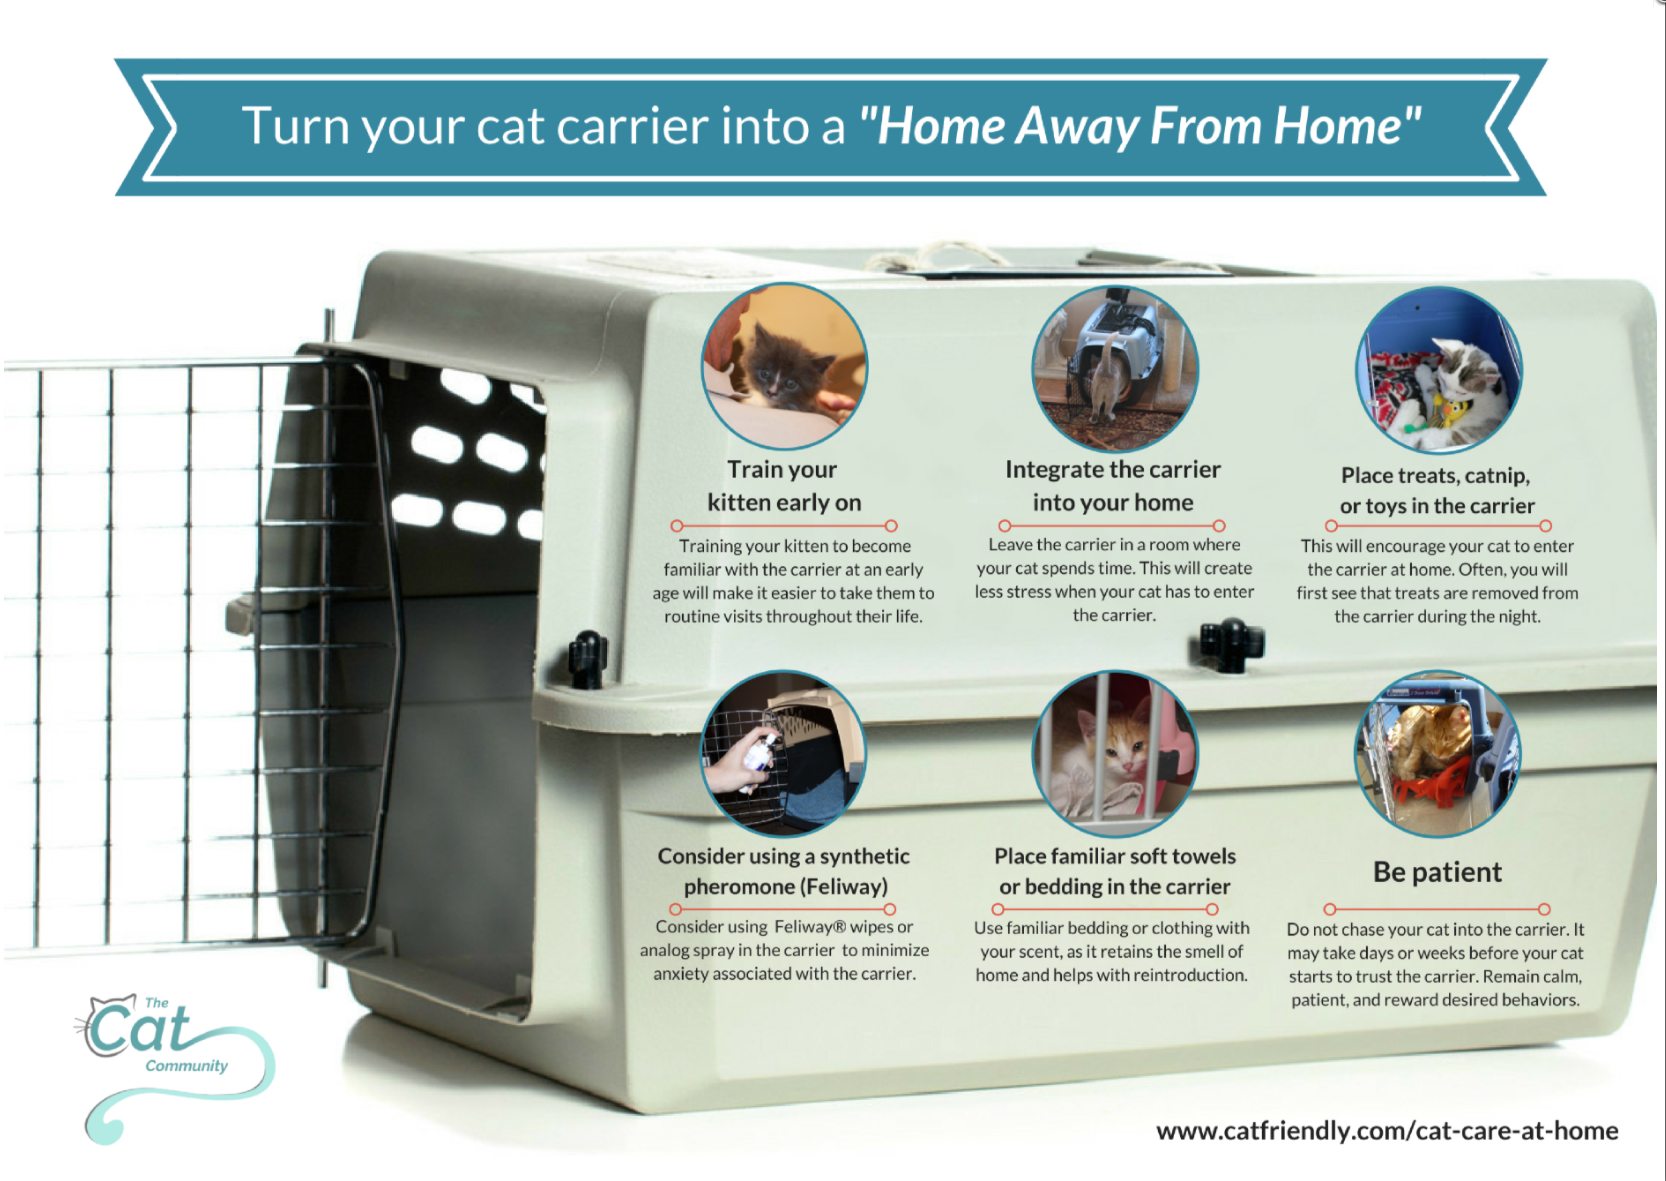 Turn Your Cat Carrier into a Home Away From Home